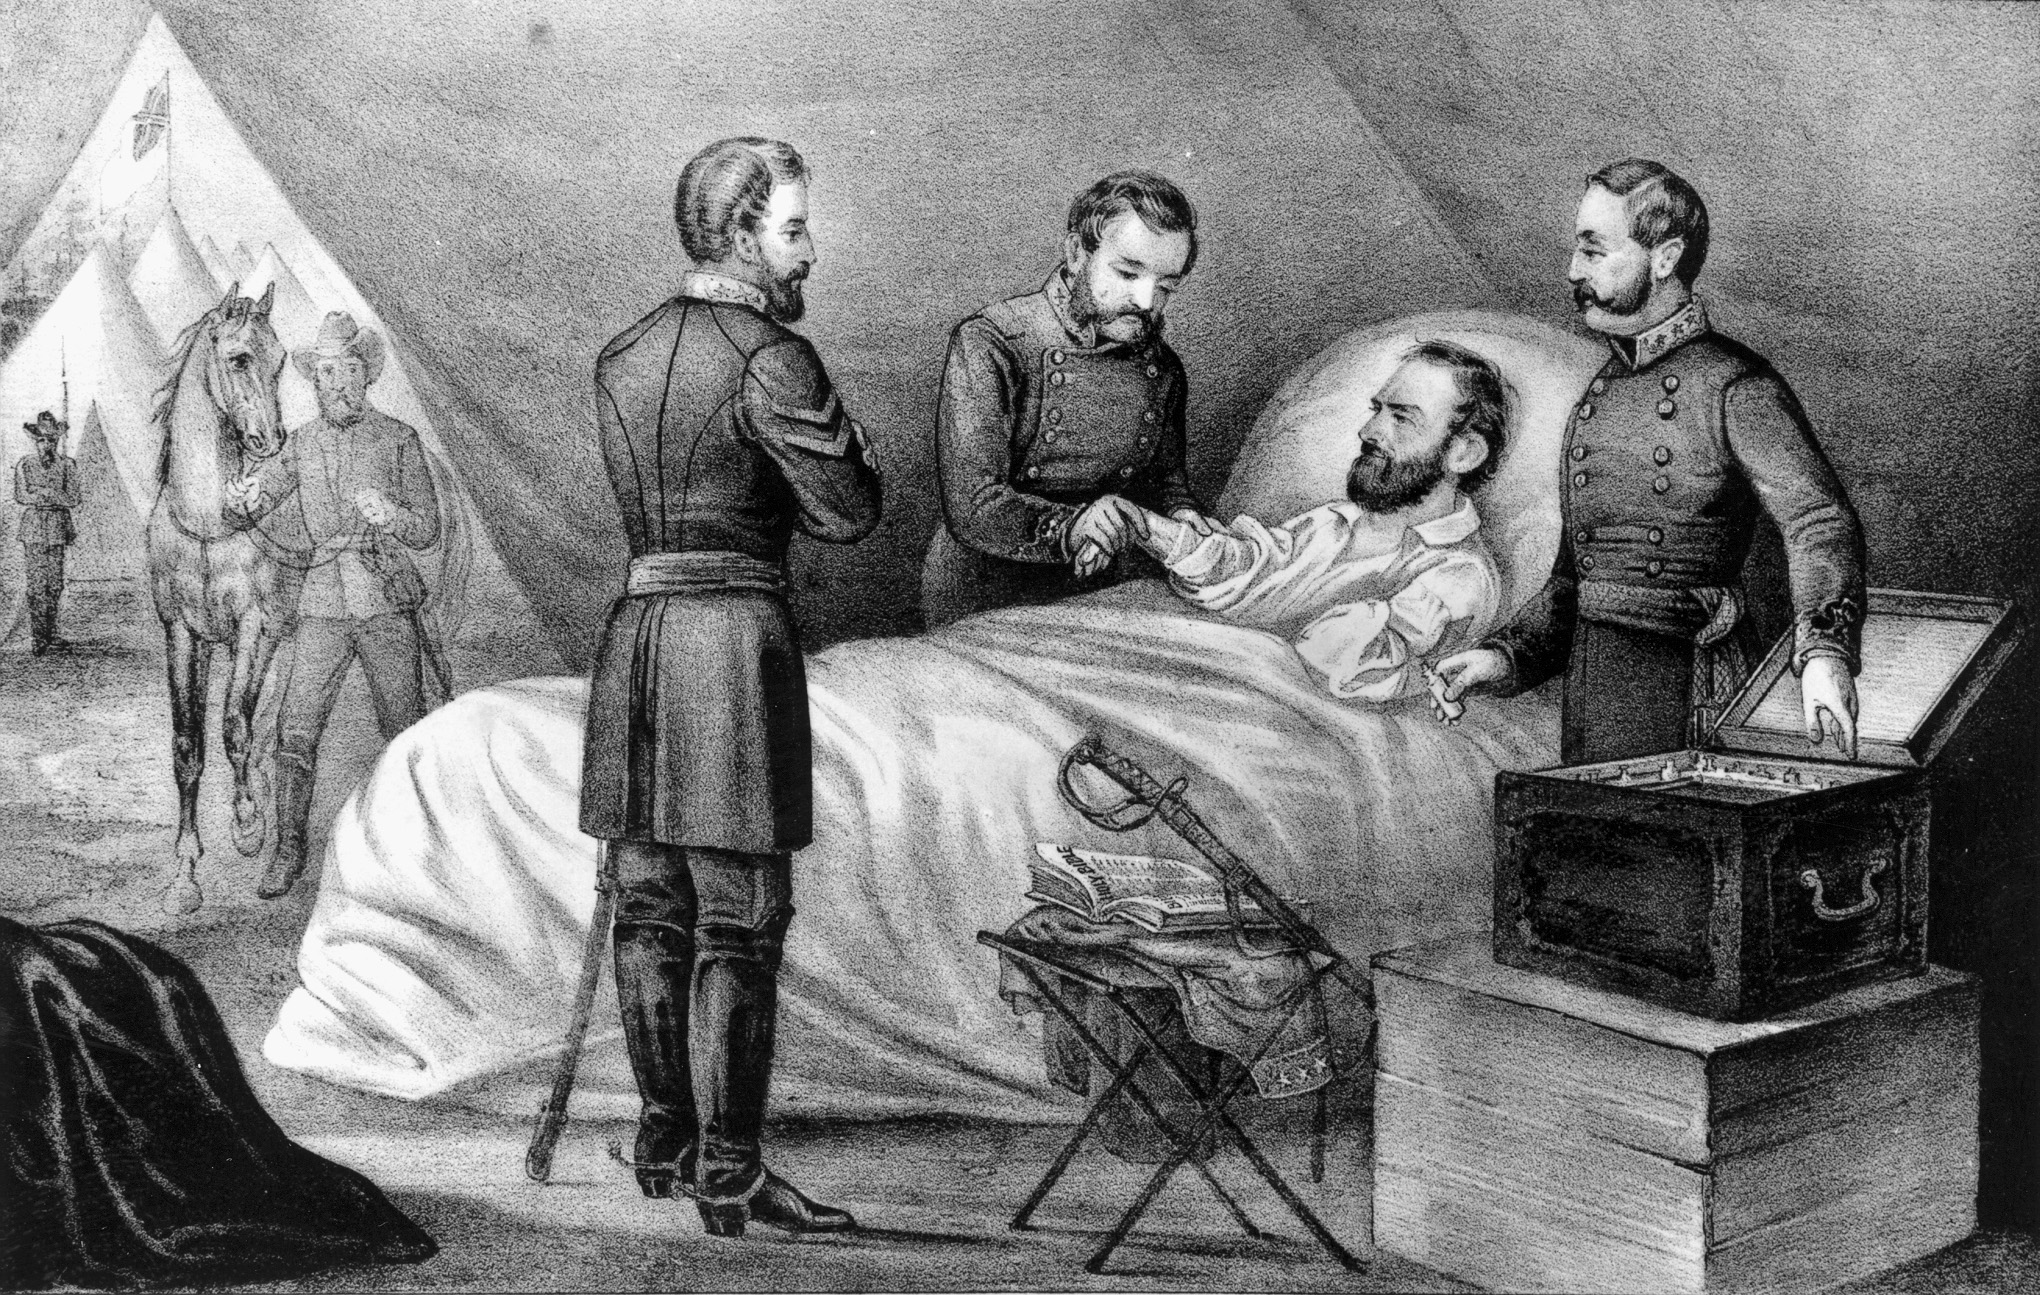 Drawing of Jackson in bed, surrounded by staff members.